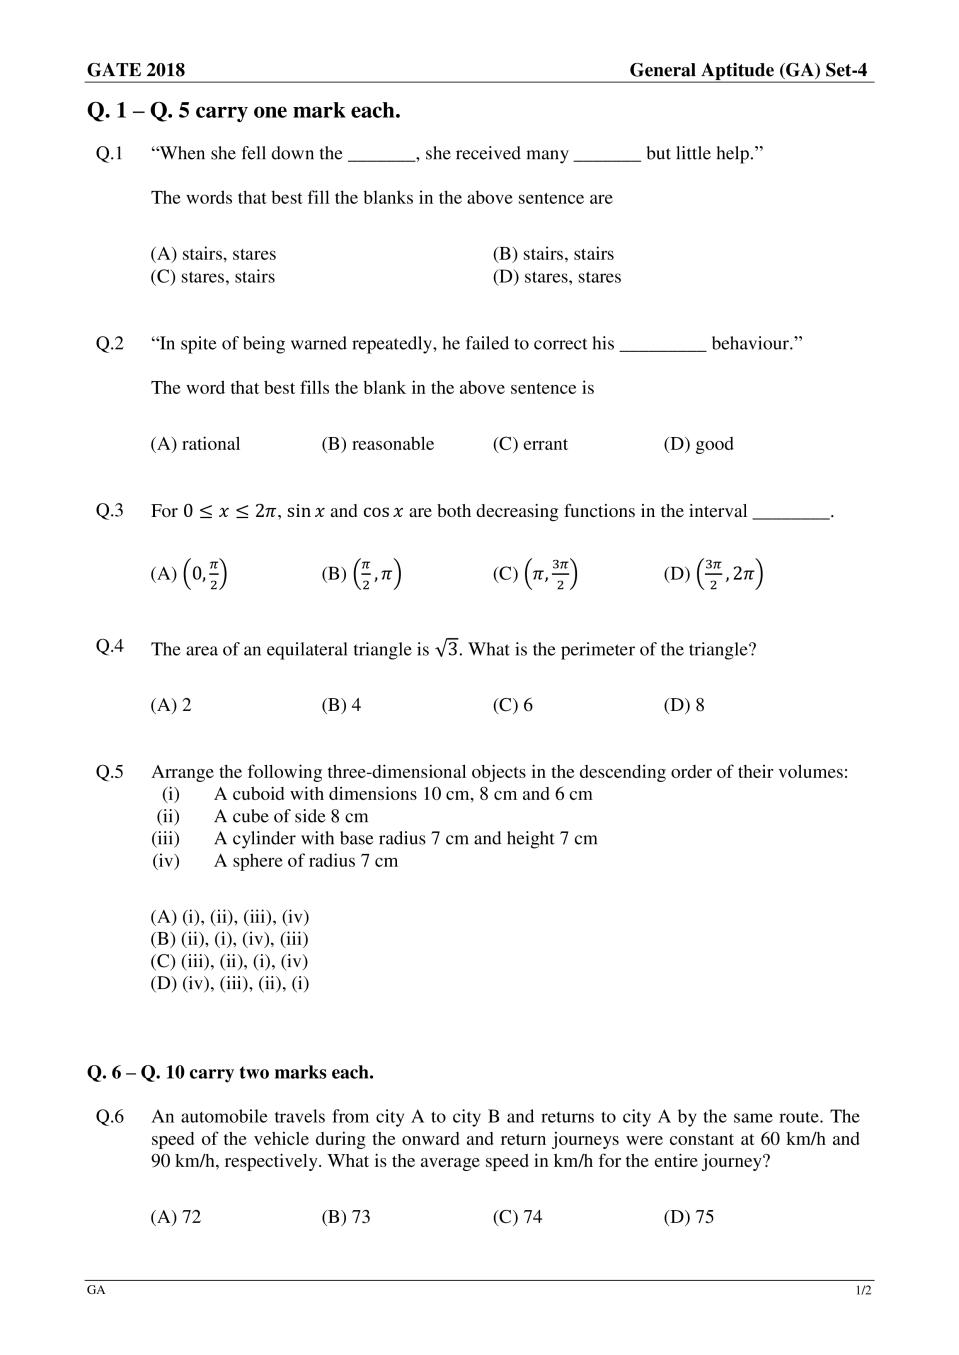 GATE 2018 Chemistry (CY) Question Paper with Answer - Page 1